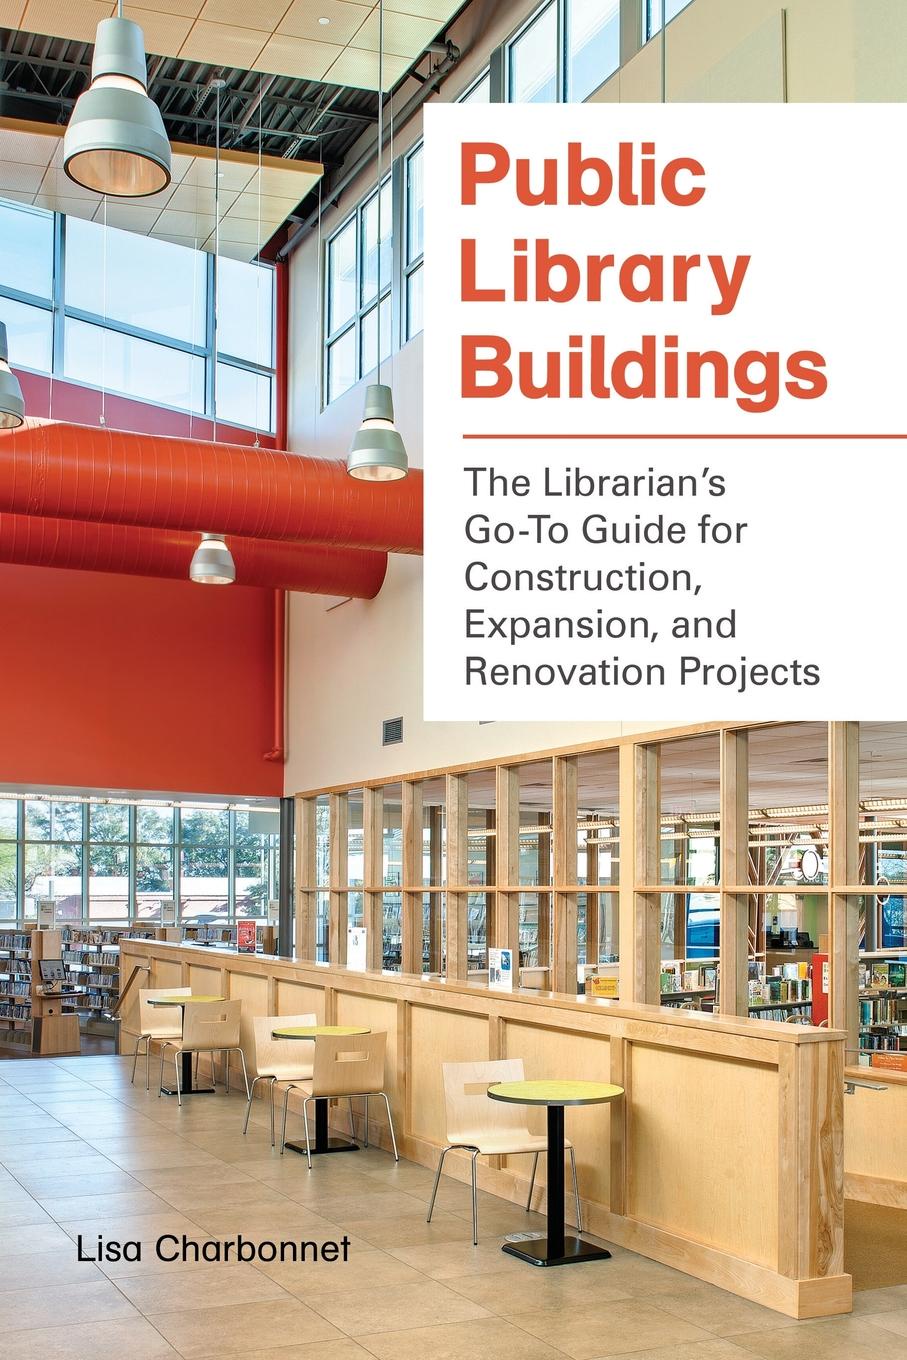 Libraries guide. Public Library. Library building. Go to the Library.